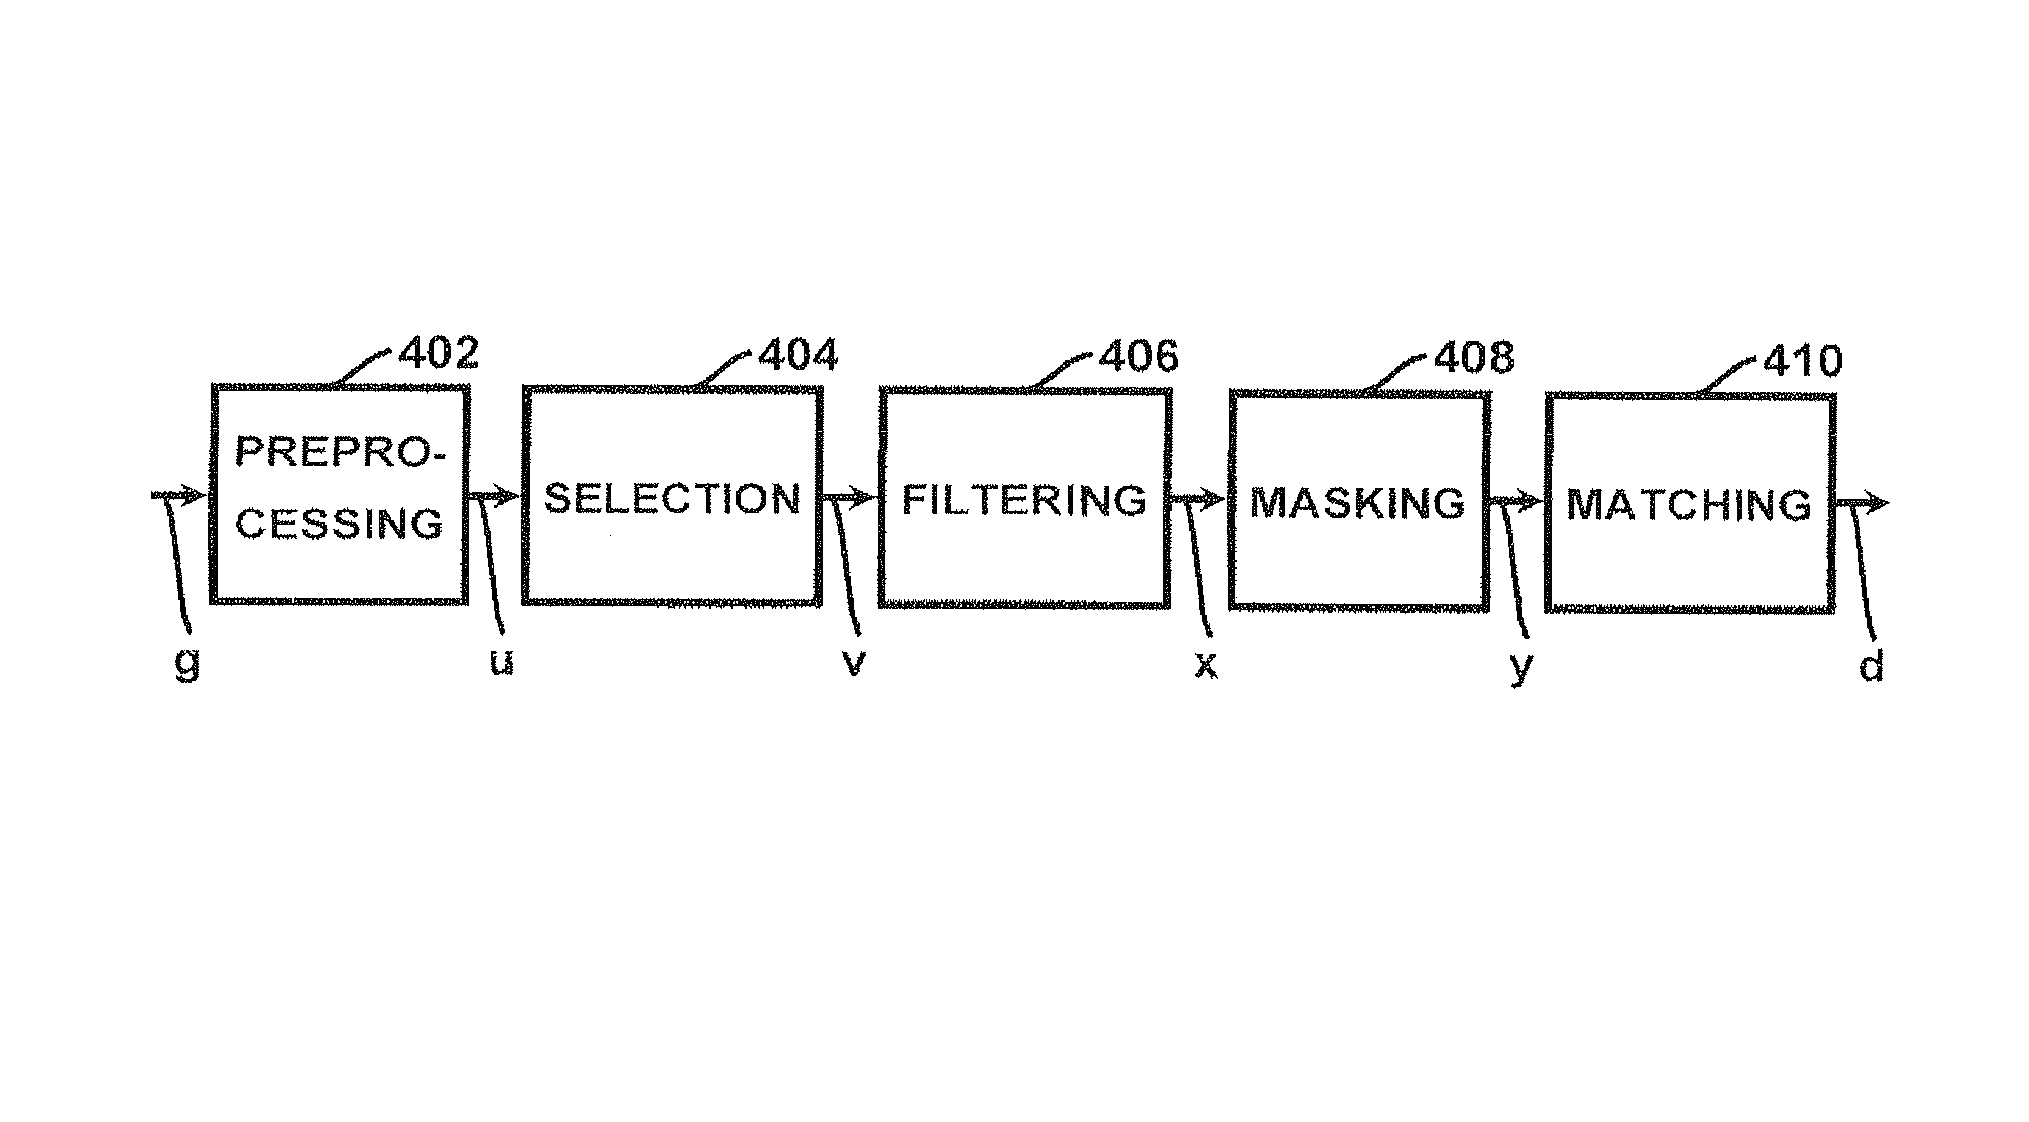 Method and apparatus for authenticating biometric scanners